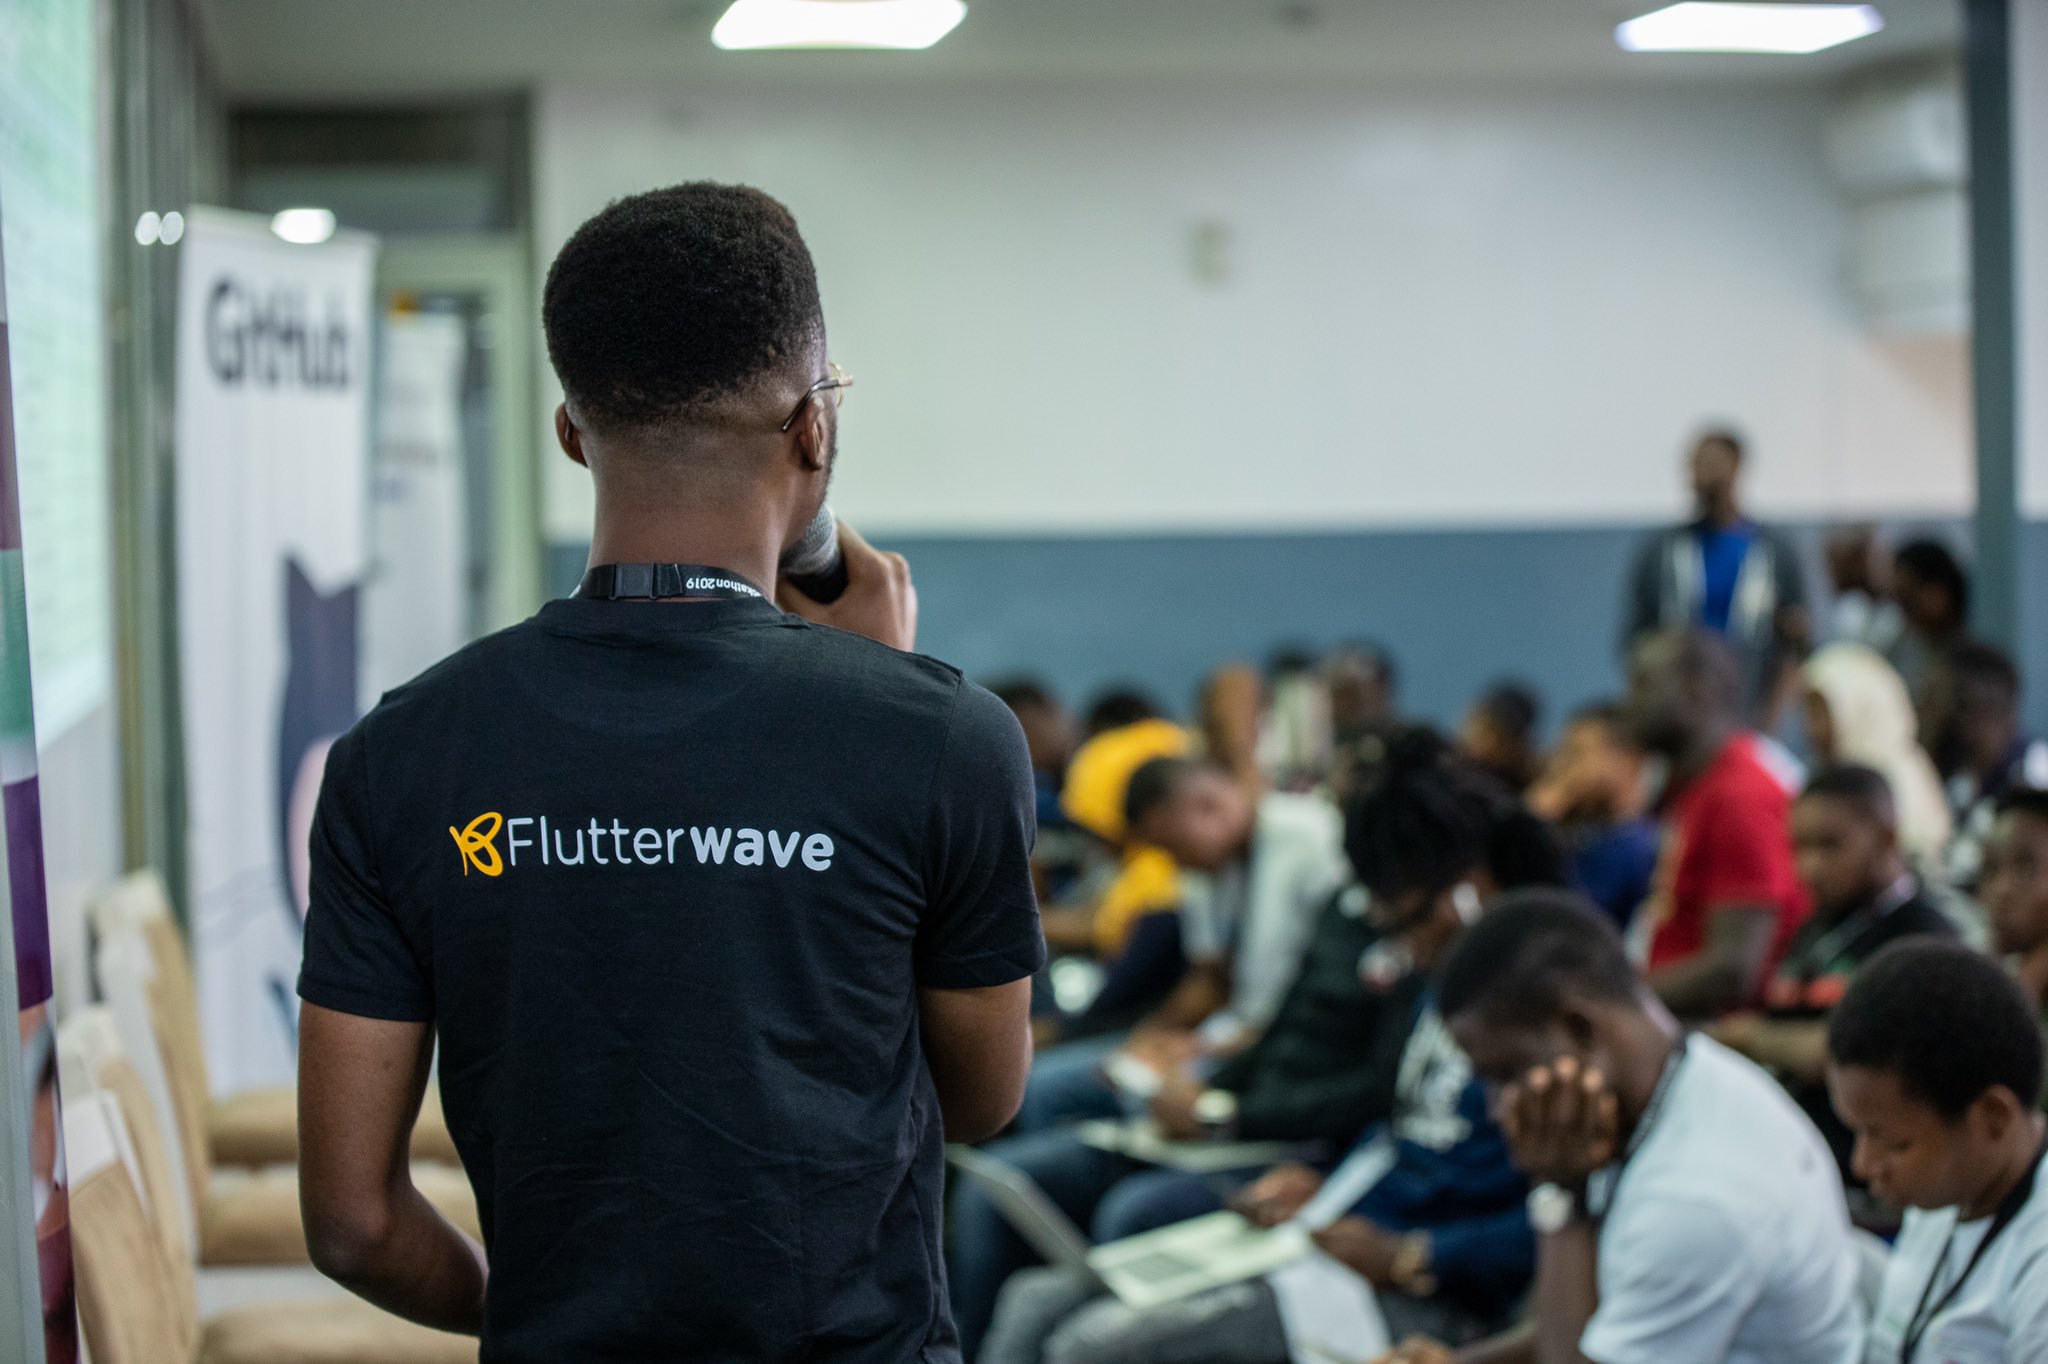 Flutterwave hires new CFO following financial misconduct allegations